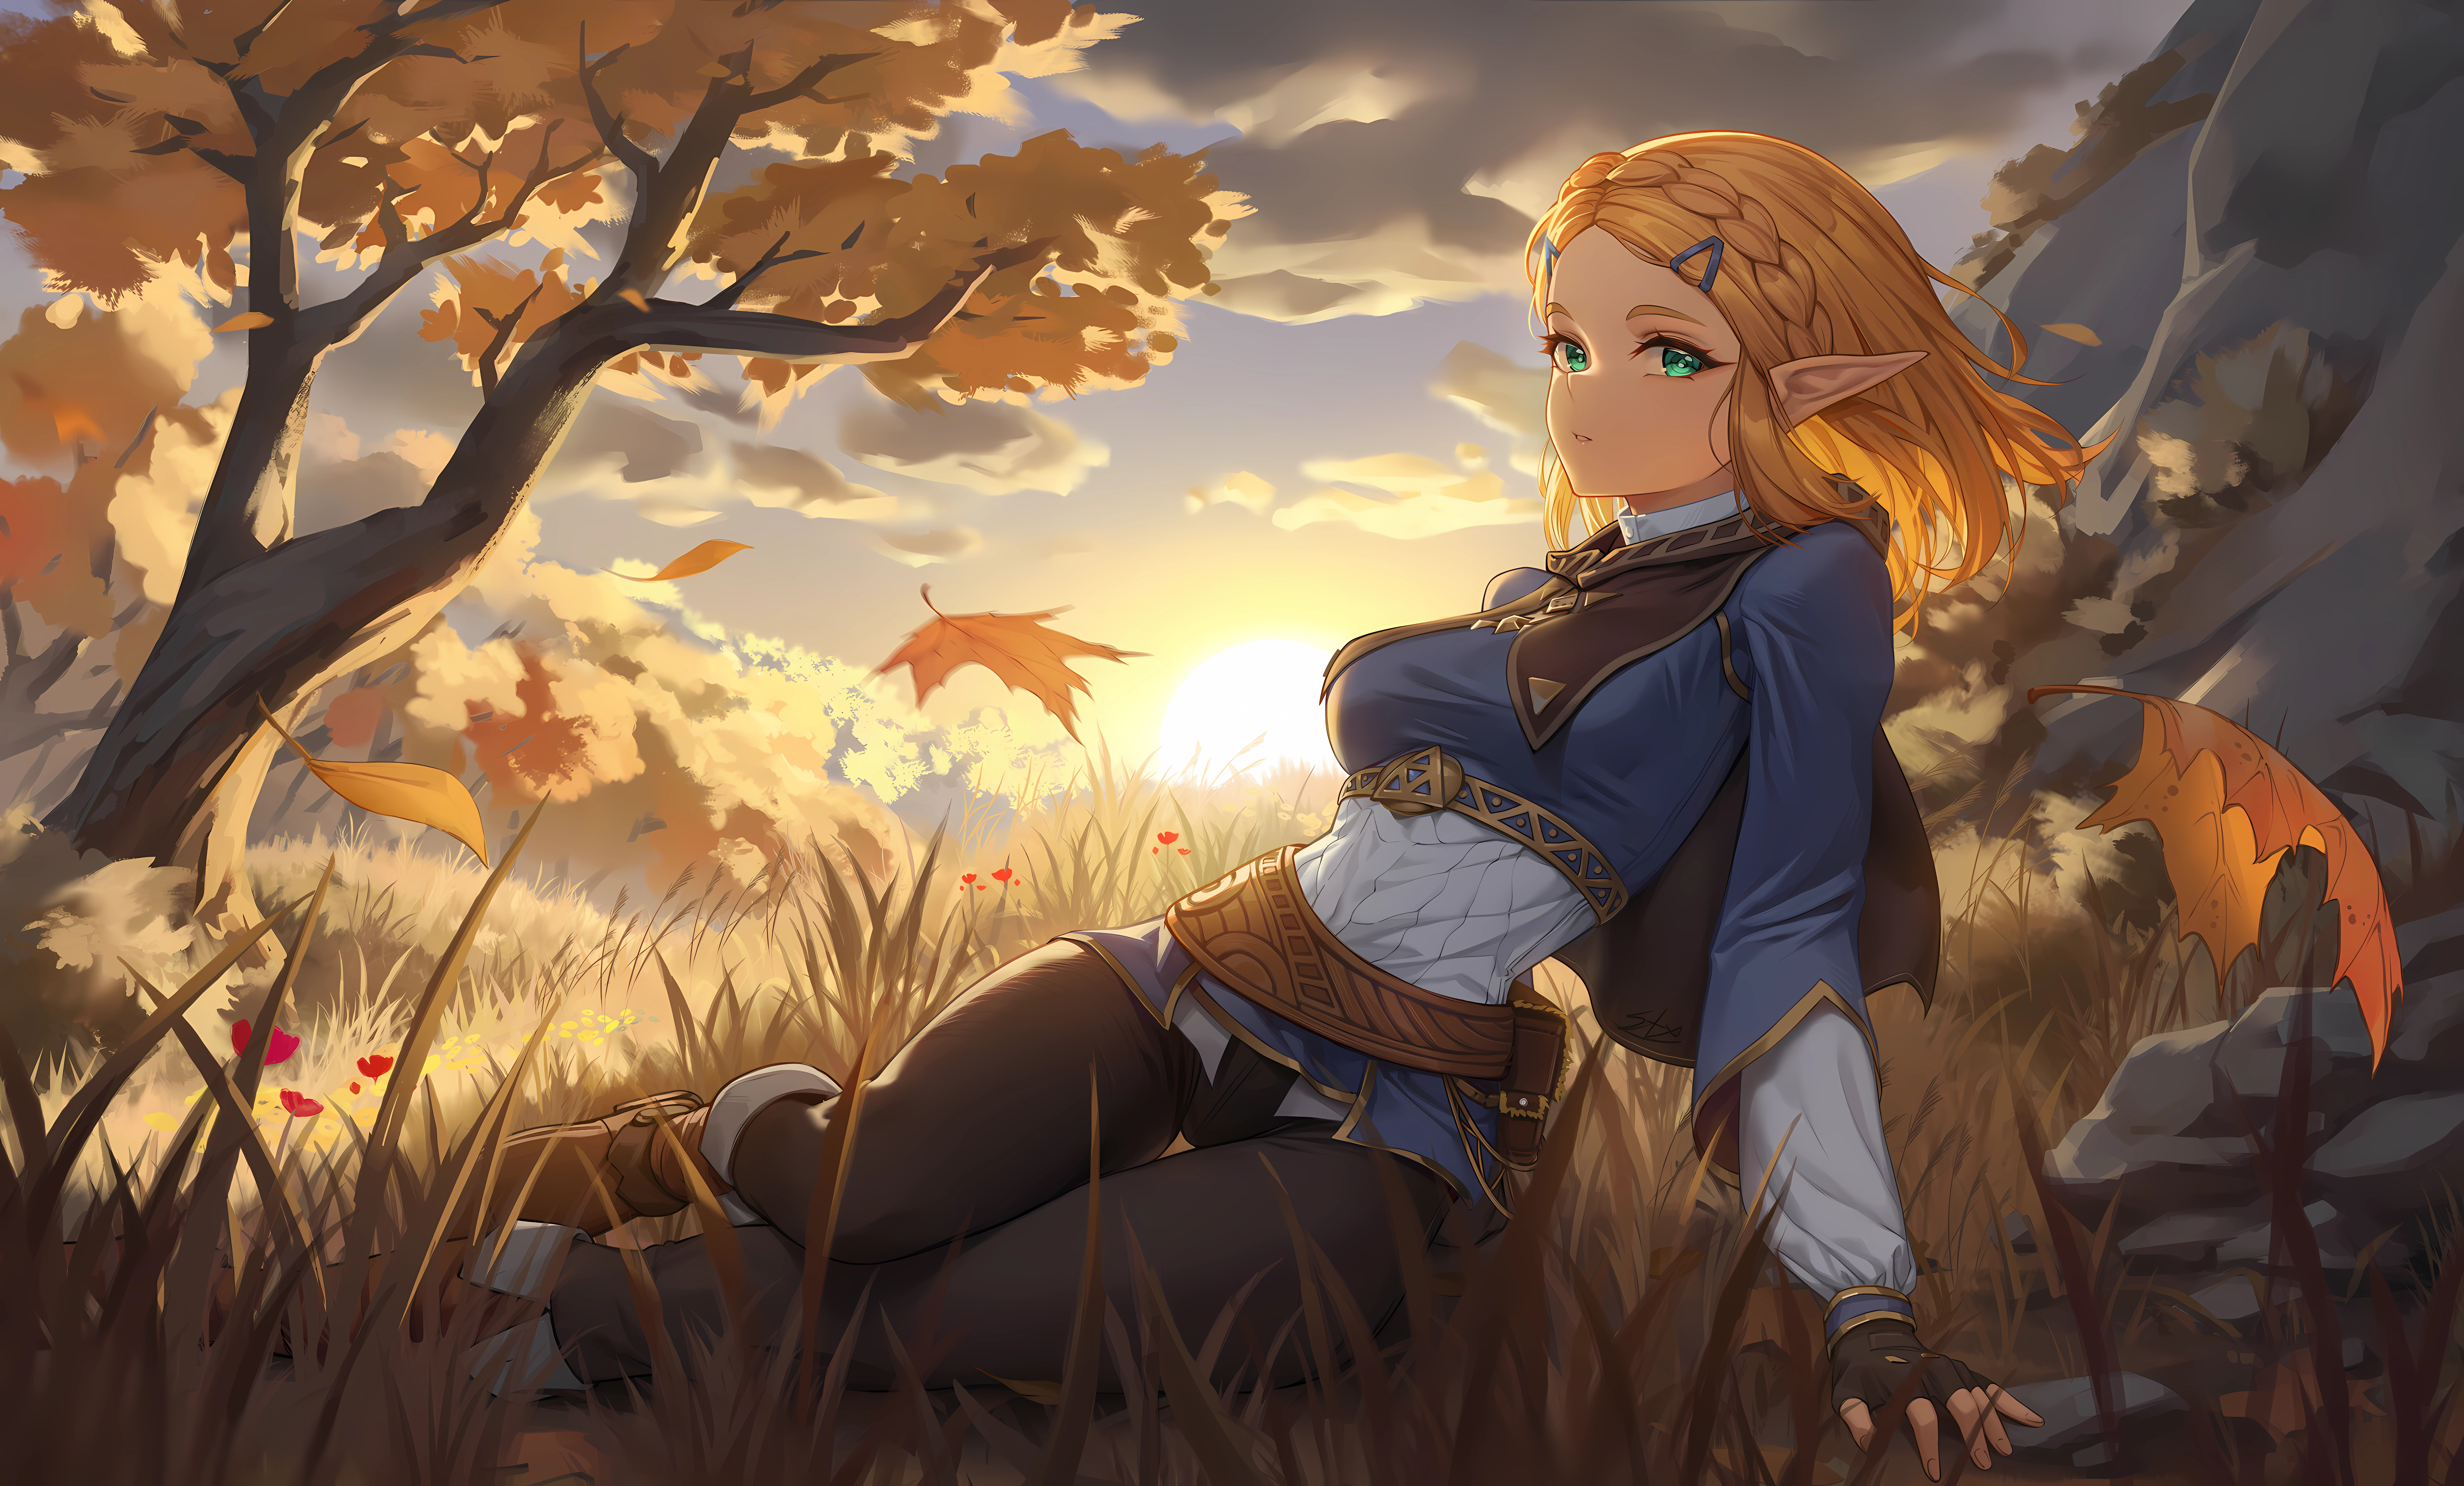 Anime 10284x6200 anime anime girls Zelda The Legend of Zelda The Legend of Zelda: Breath of the Wild The Legend of Zelda: Tears of the Kingdom pointy ears grass sunset sunset glow leaves trees sky clouds looking at viewer rocks gloves fingerless gloves StormStx